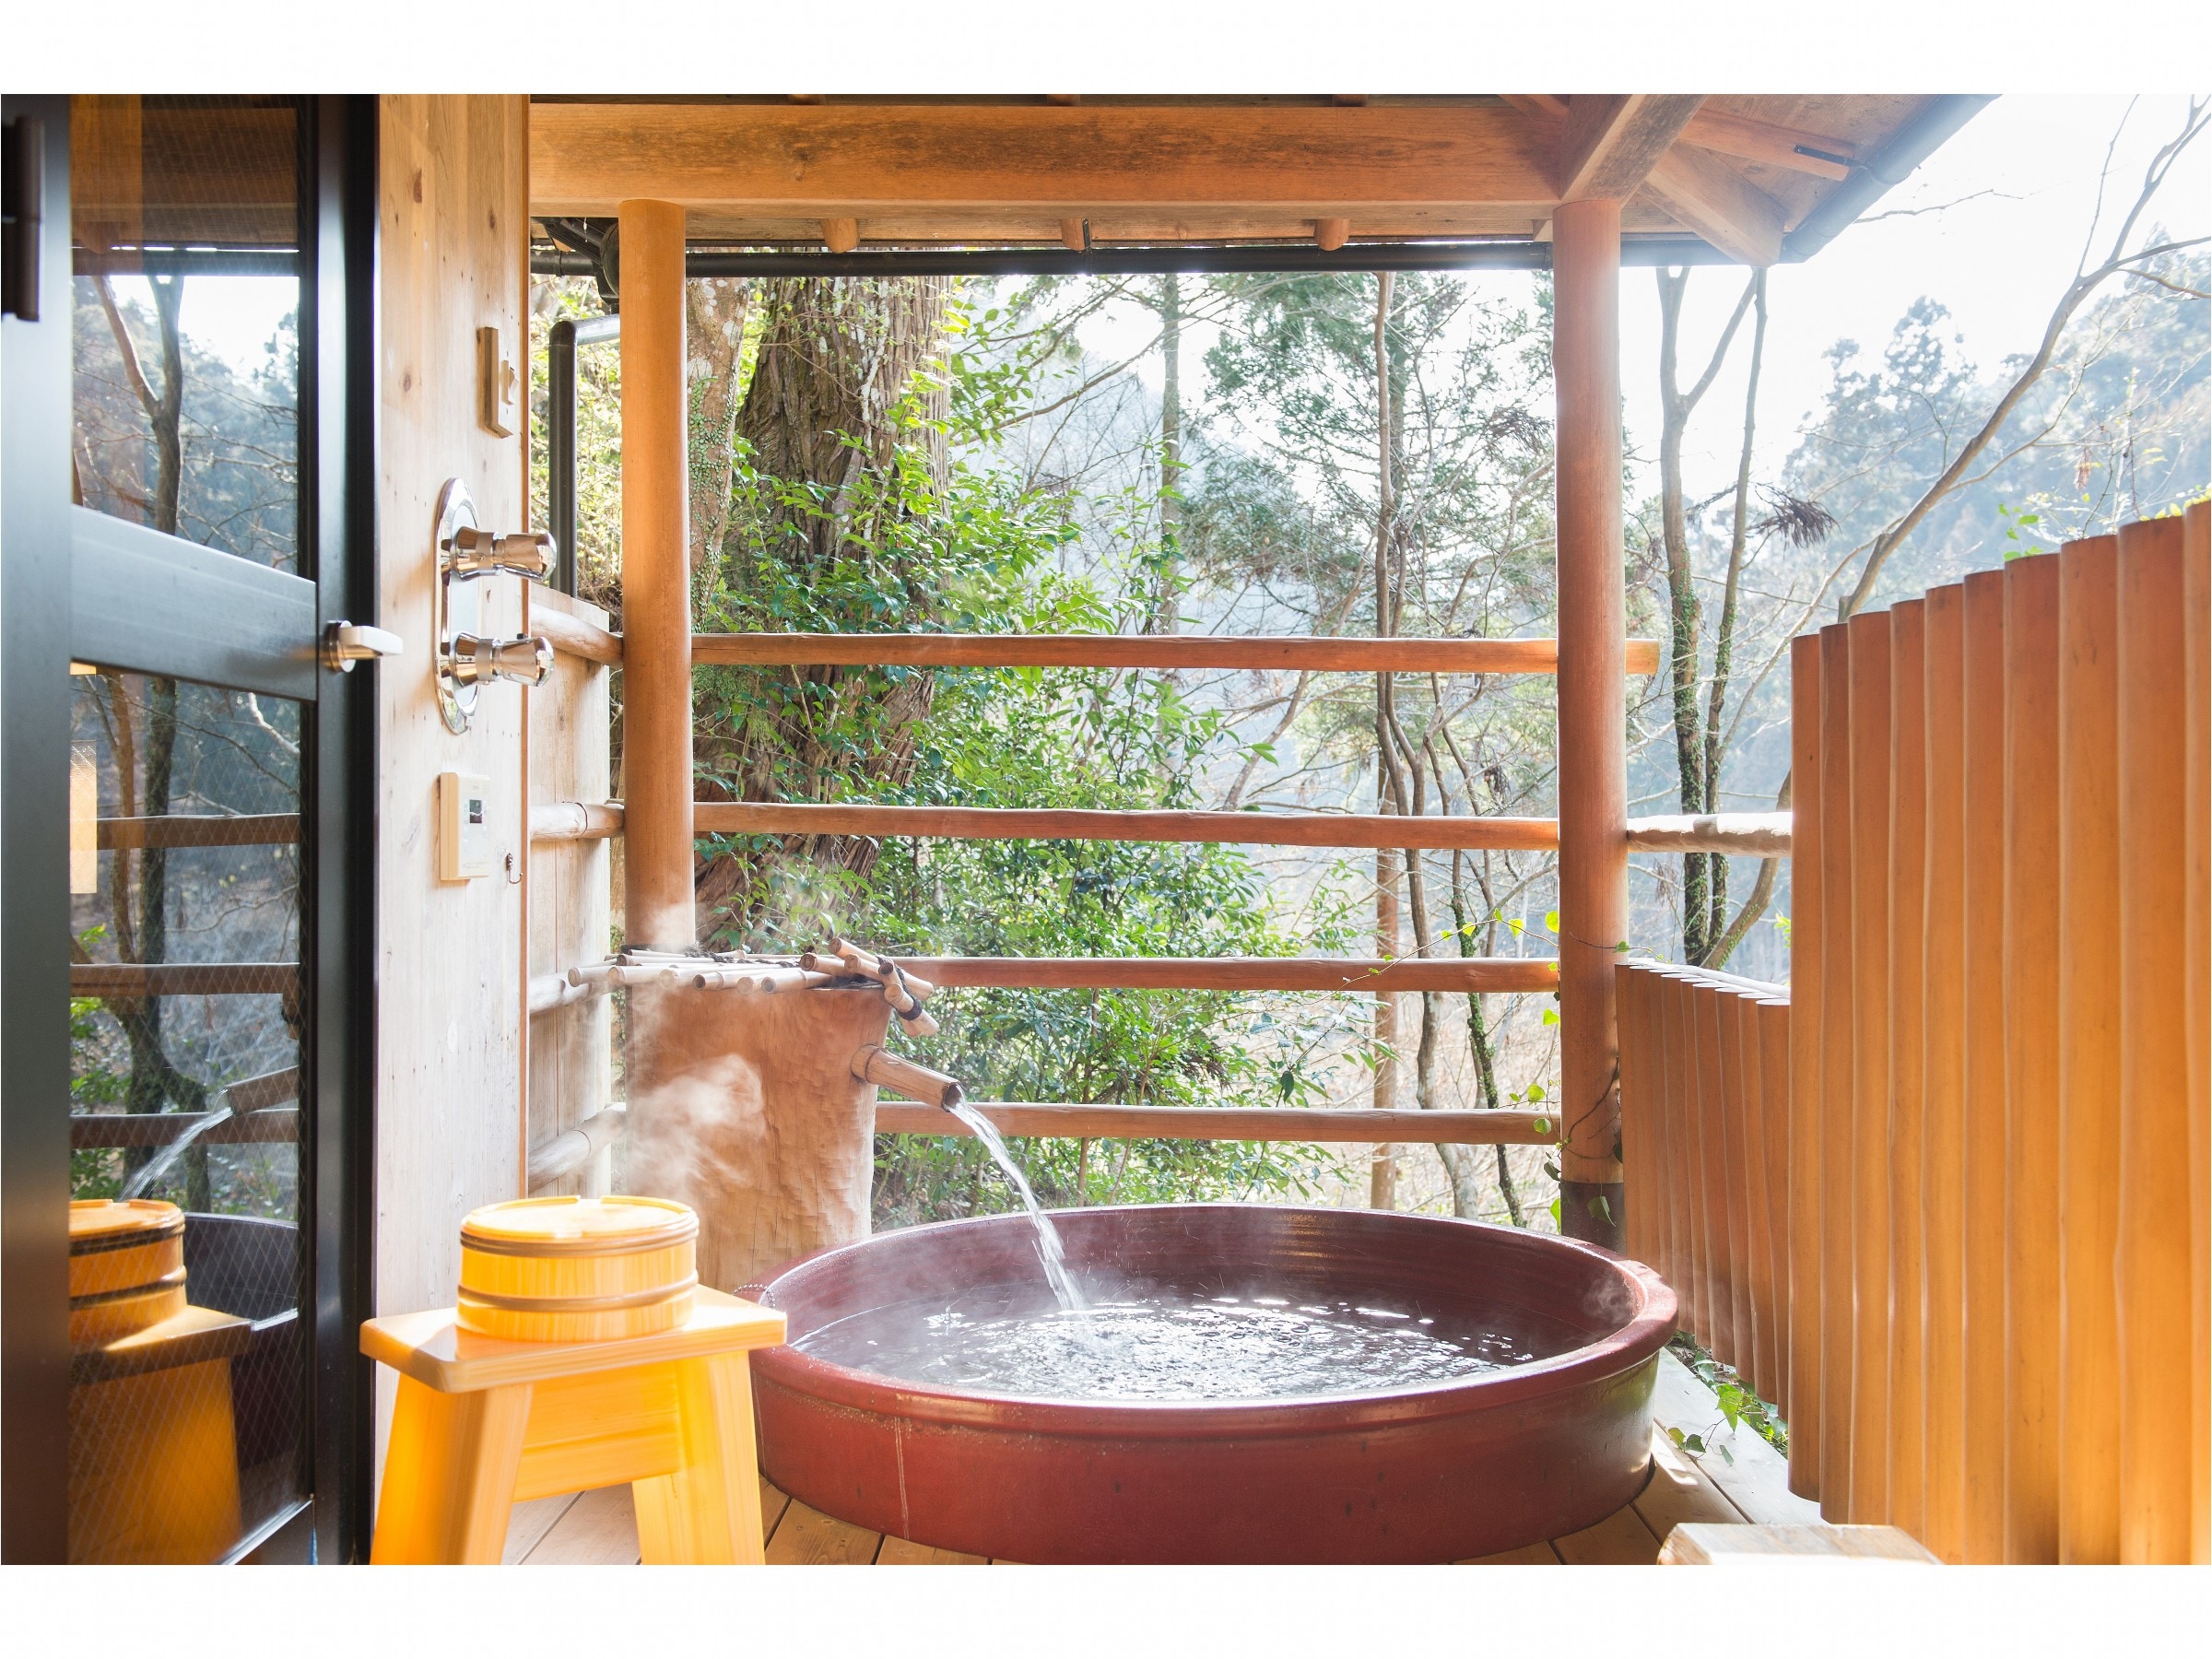 Japanese-Western style detached room with open-air bath [Hototogisu]